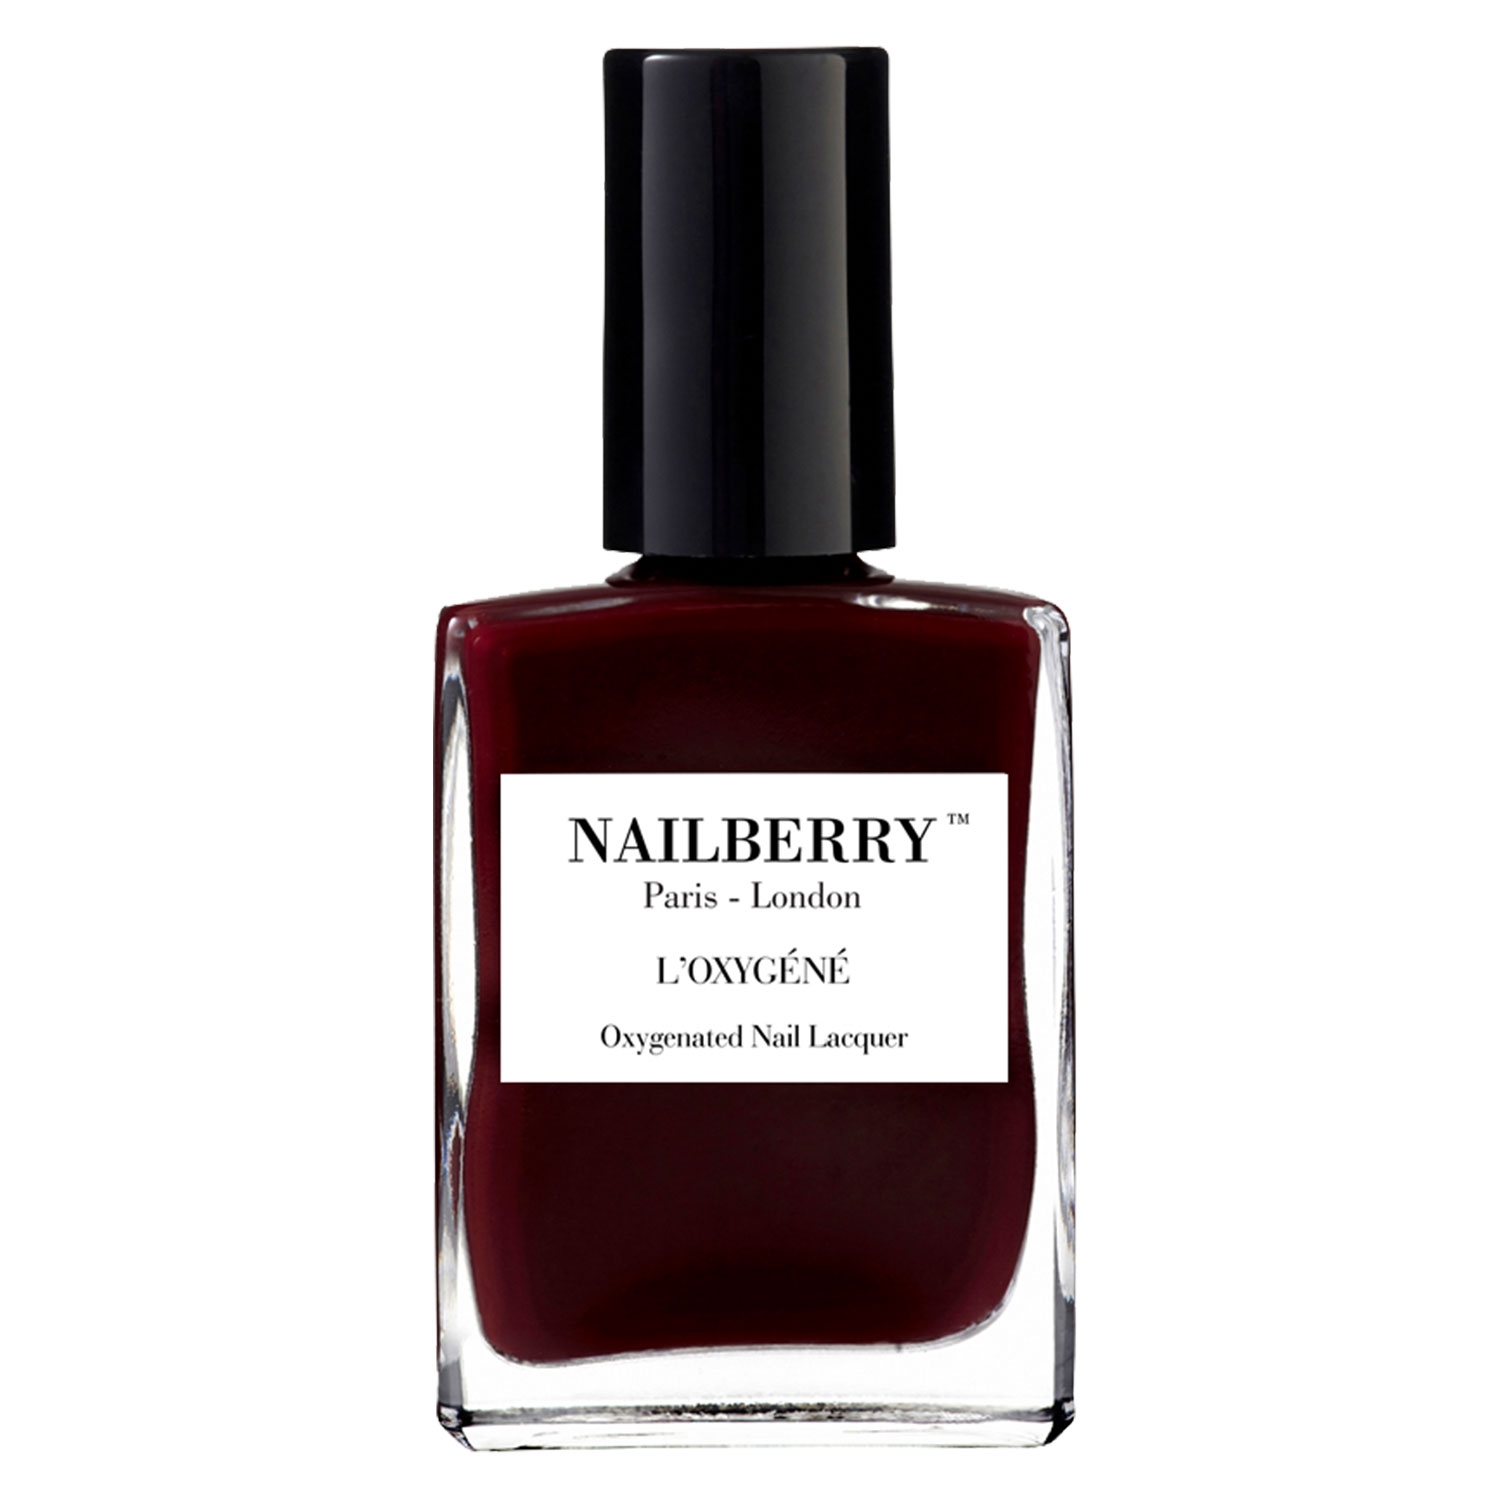 Product image from L'oxygéné - Noirberry